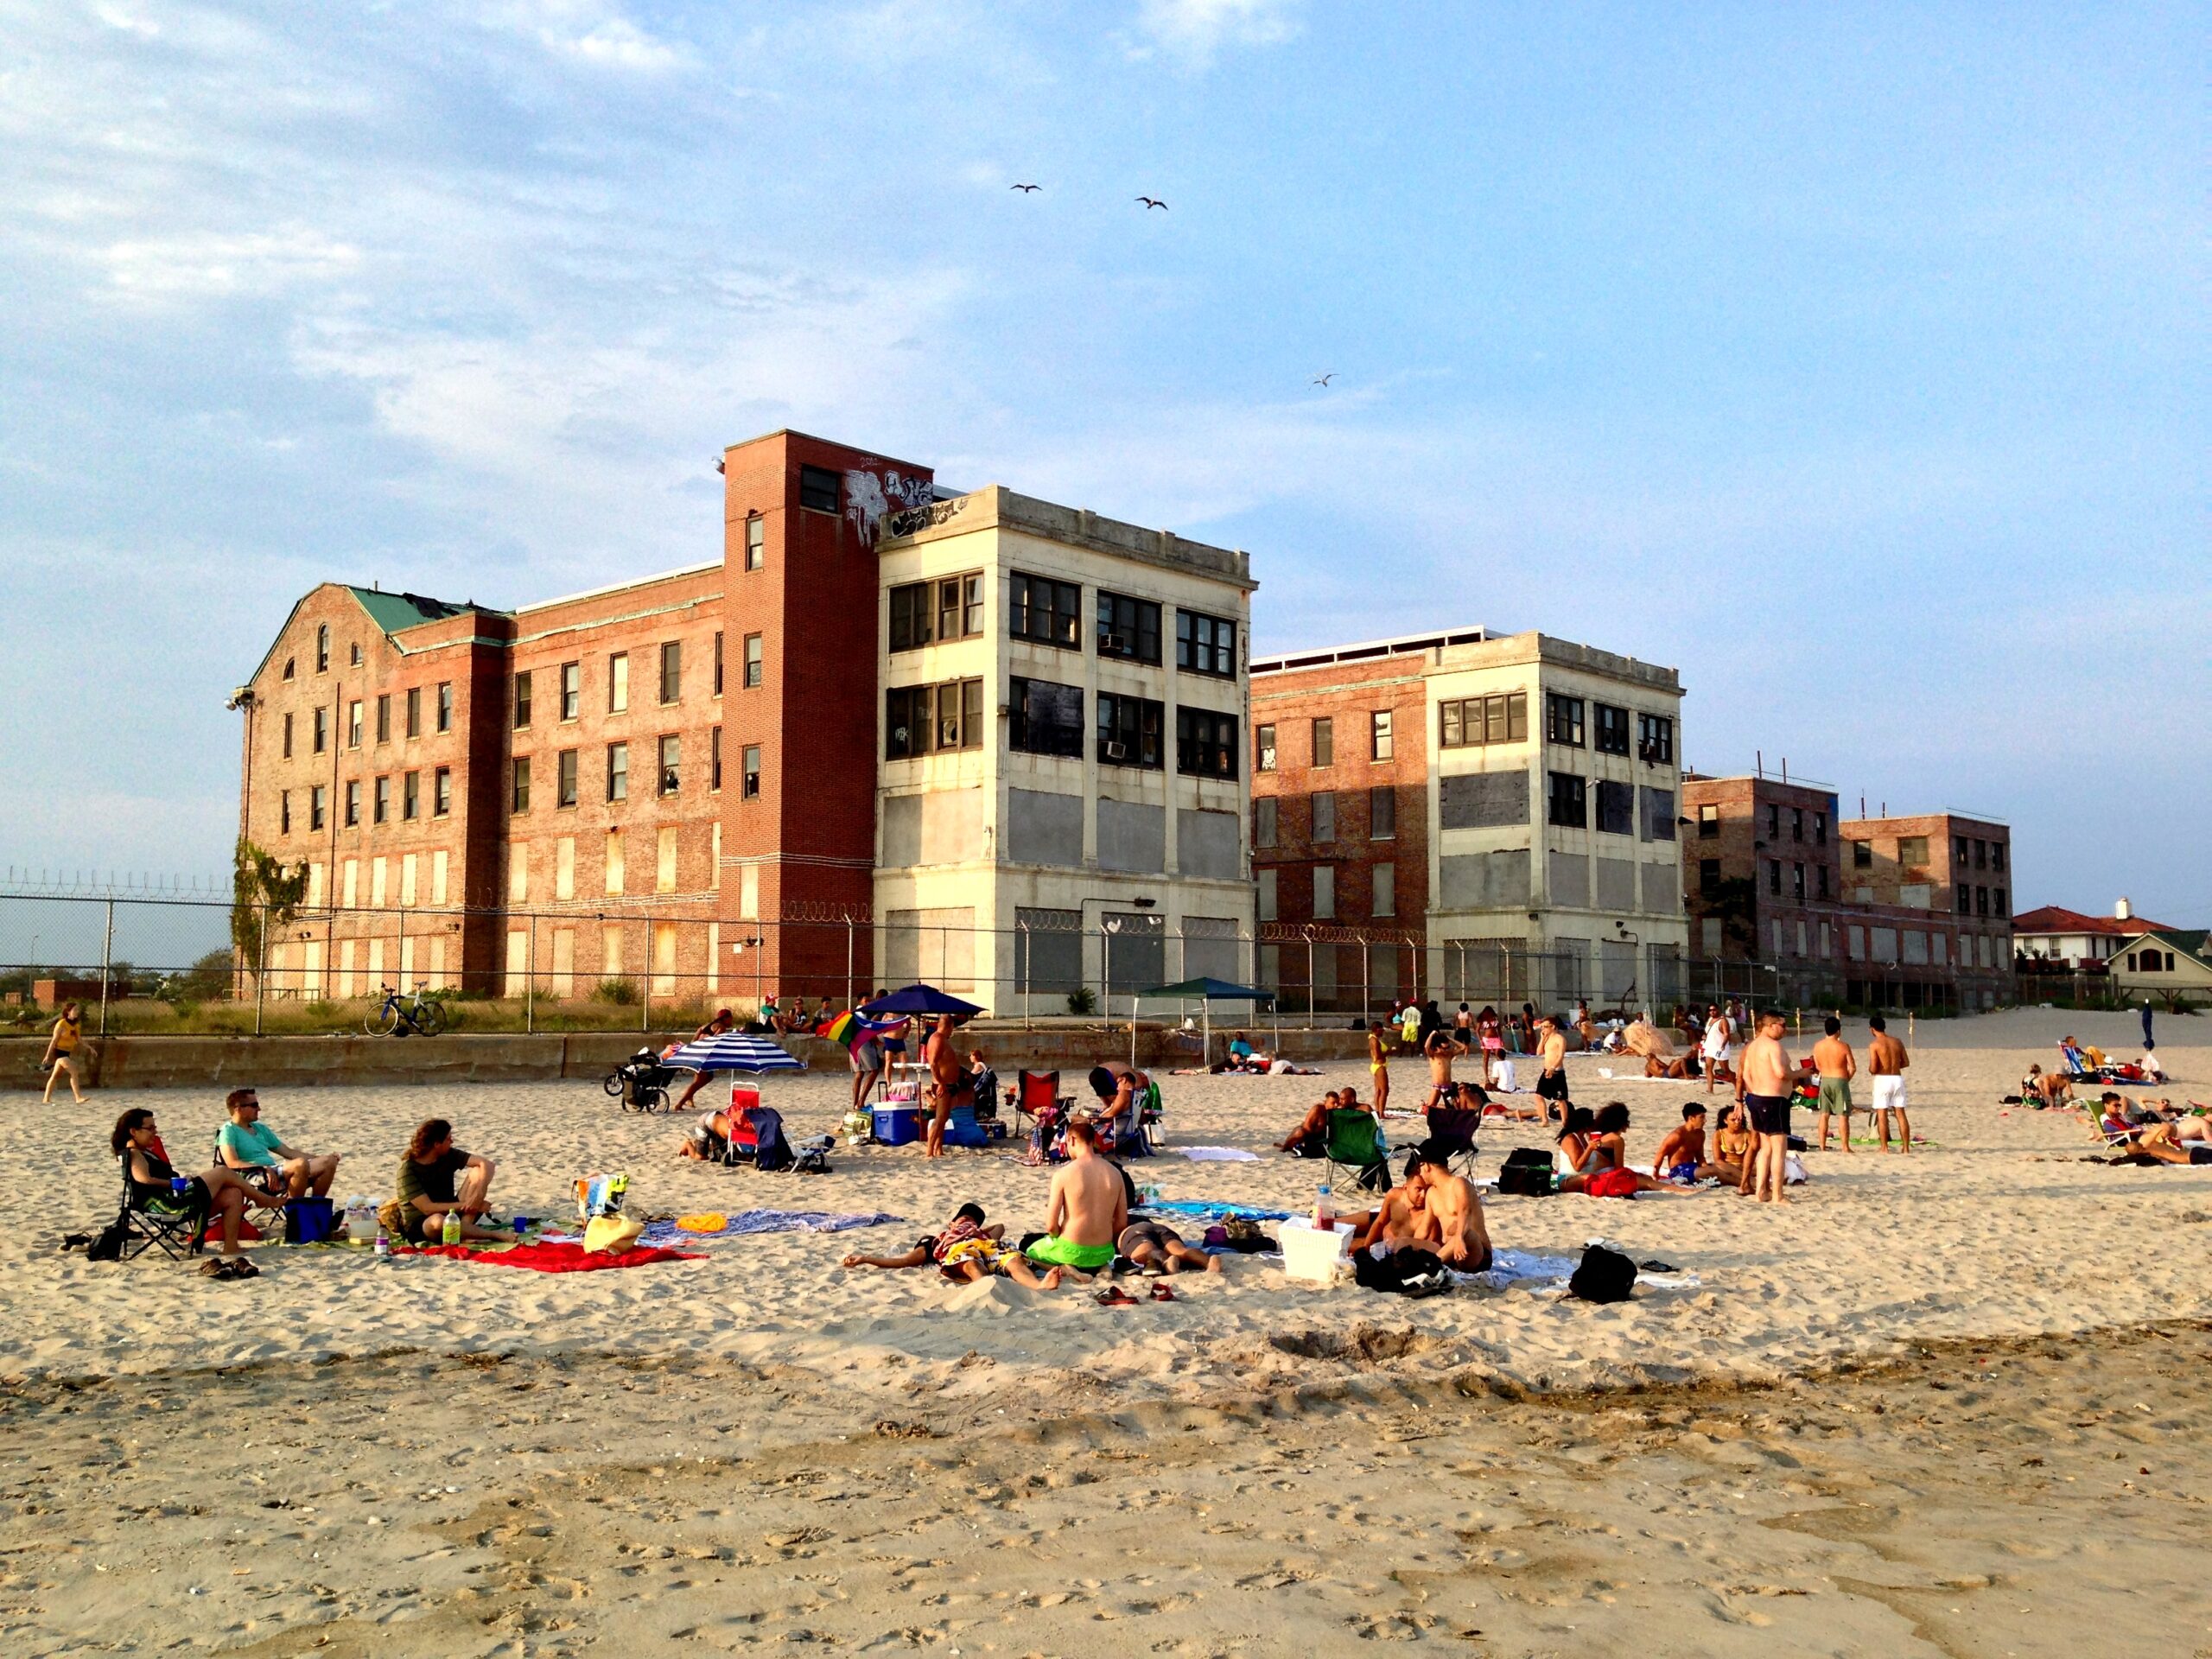 A color photograph of a beach with a large building in the background